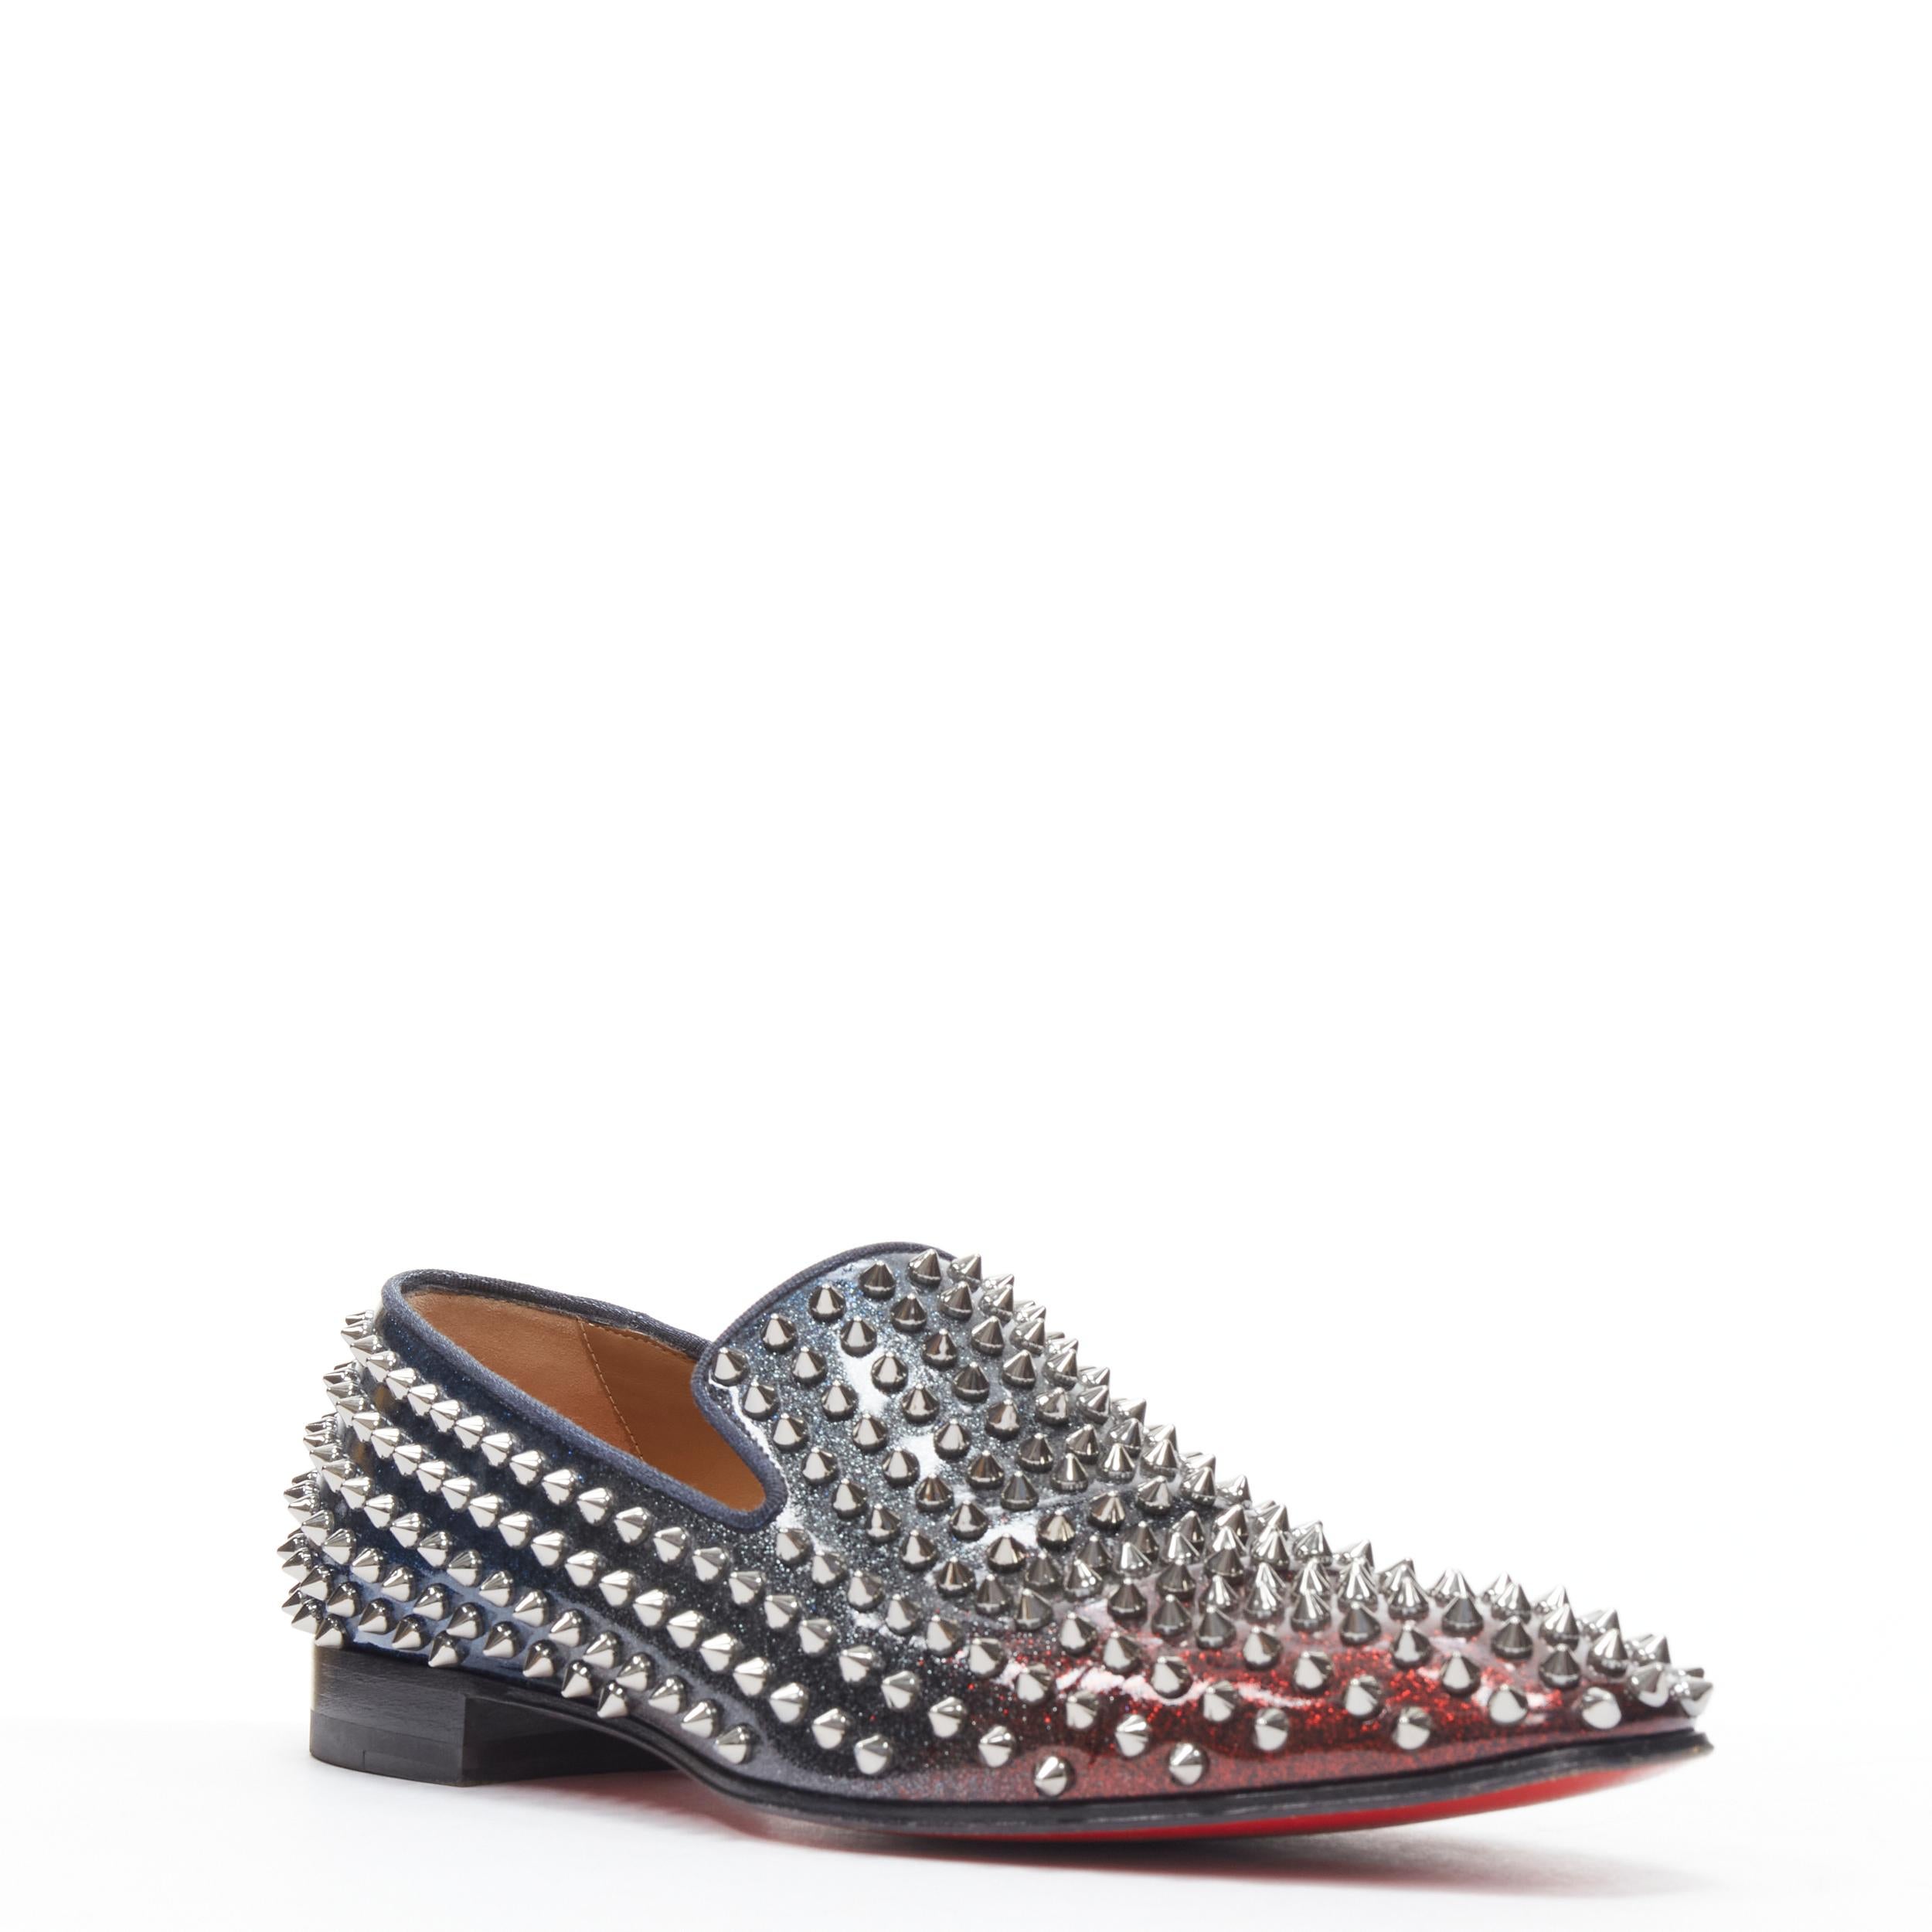 CHRISTIAN LOUBOUTIN Rollerboy navy red glitter gradient spike stud loafer EU42 
Reference: TGAS/B01711 
Brand: Christian Louboutin 
Designer: Christian Louboutin 
Model: Rollerboy 
Material: Patent Leather 
Color: Multicolour 
Pattern: Solid 
Extra